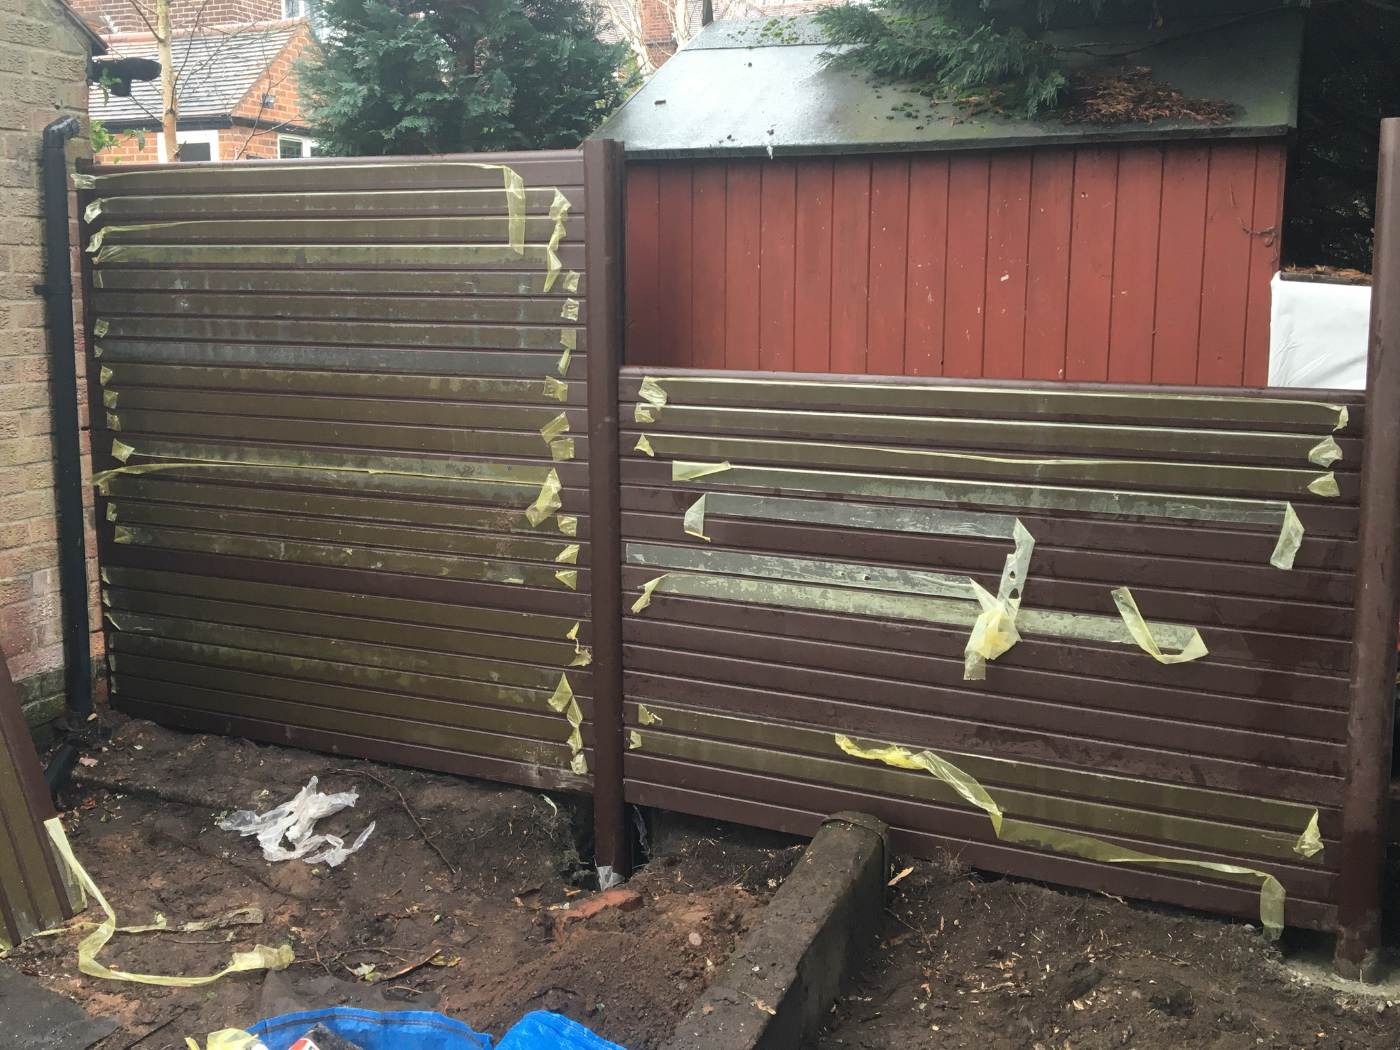 nottingham fencing brown composite fence panels in composite posts